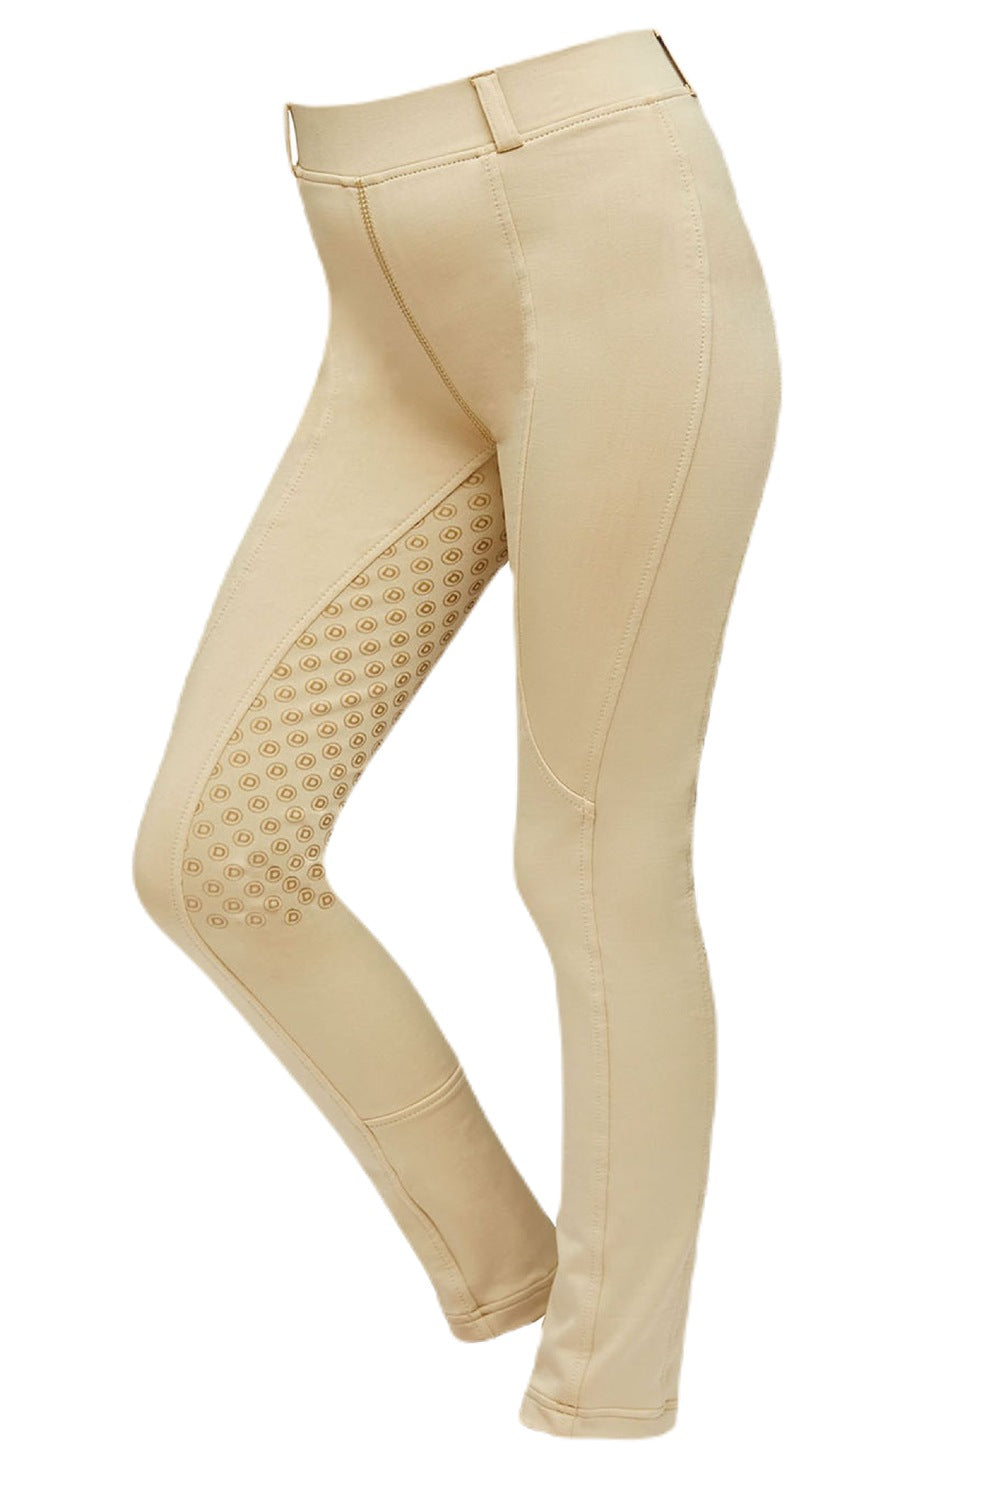 Dublin Childrens Performance Cool-It Gel Riding Tights In Beige 